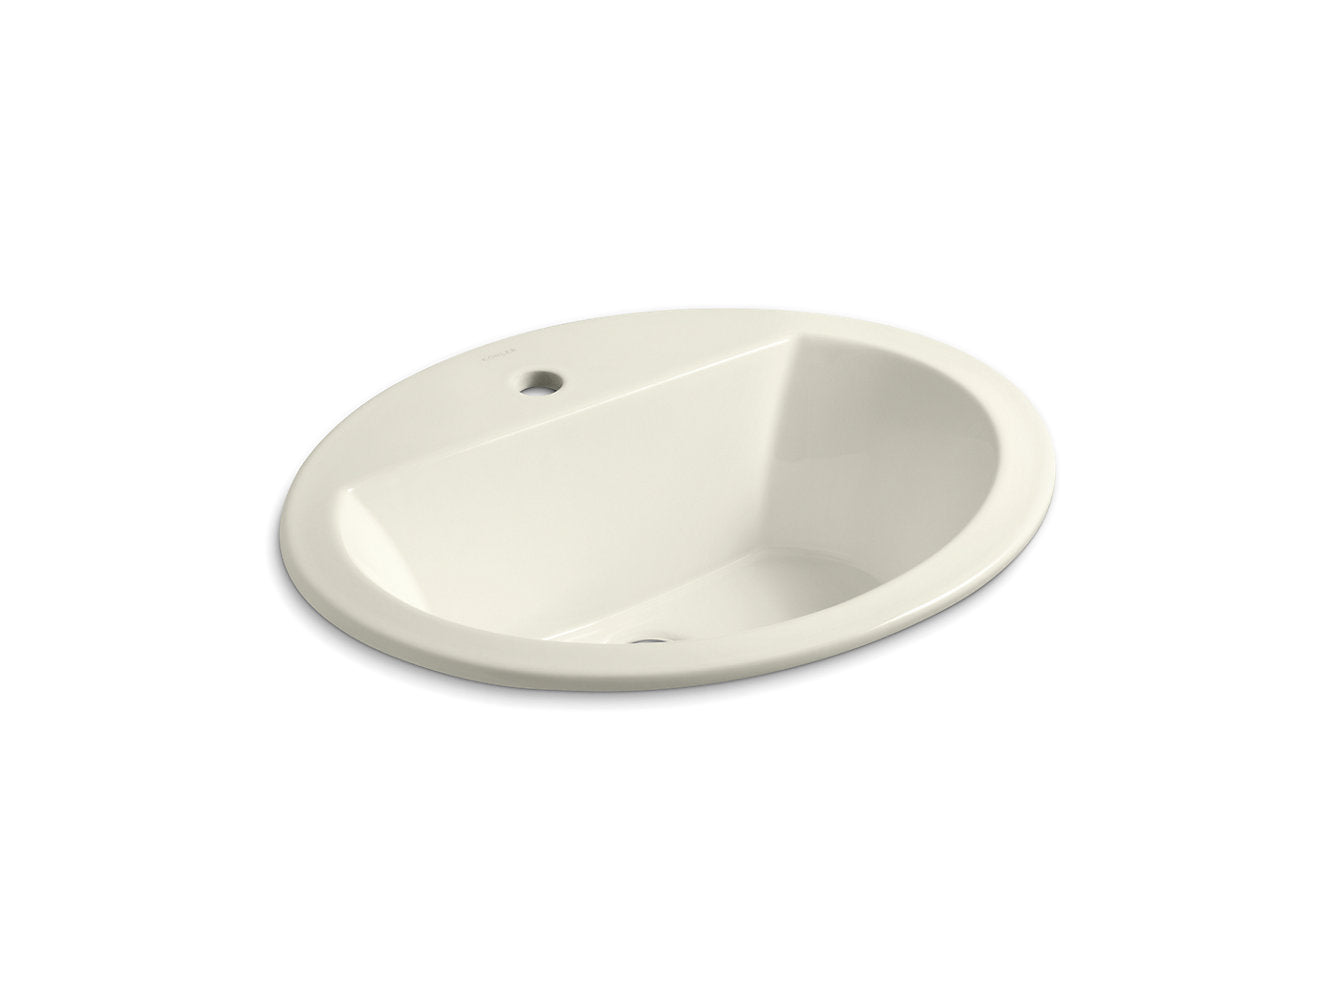 Kohler Bryant Oval 20-1/8" x 16-1/2" Drop-in Bathroom Sink With Single Faucet Hole - Biscuit